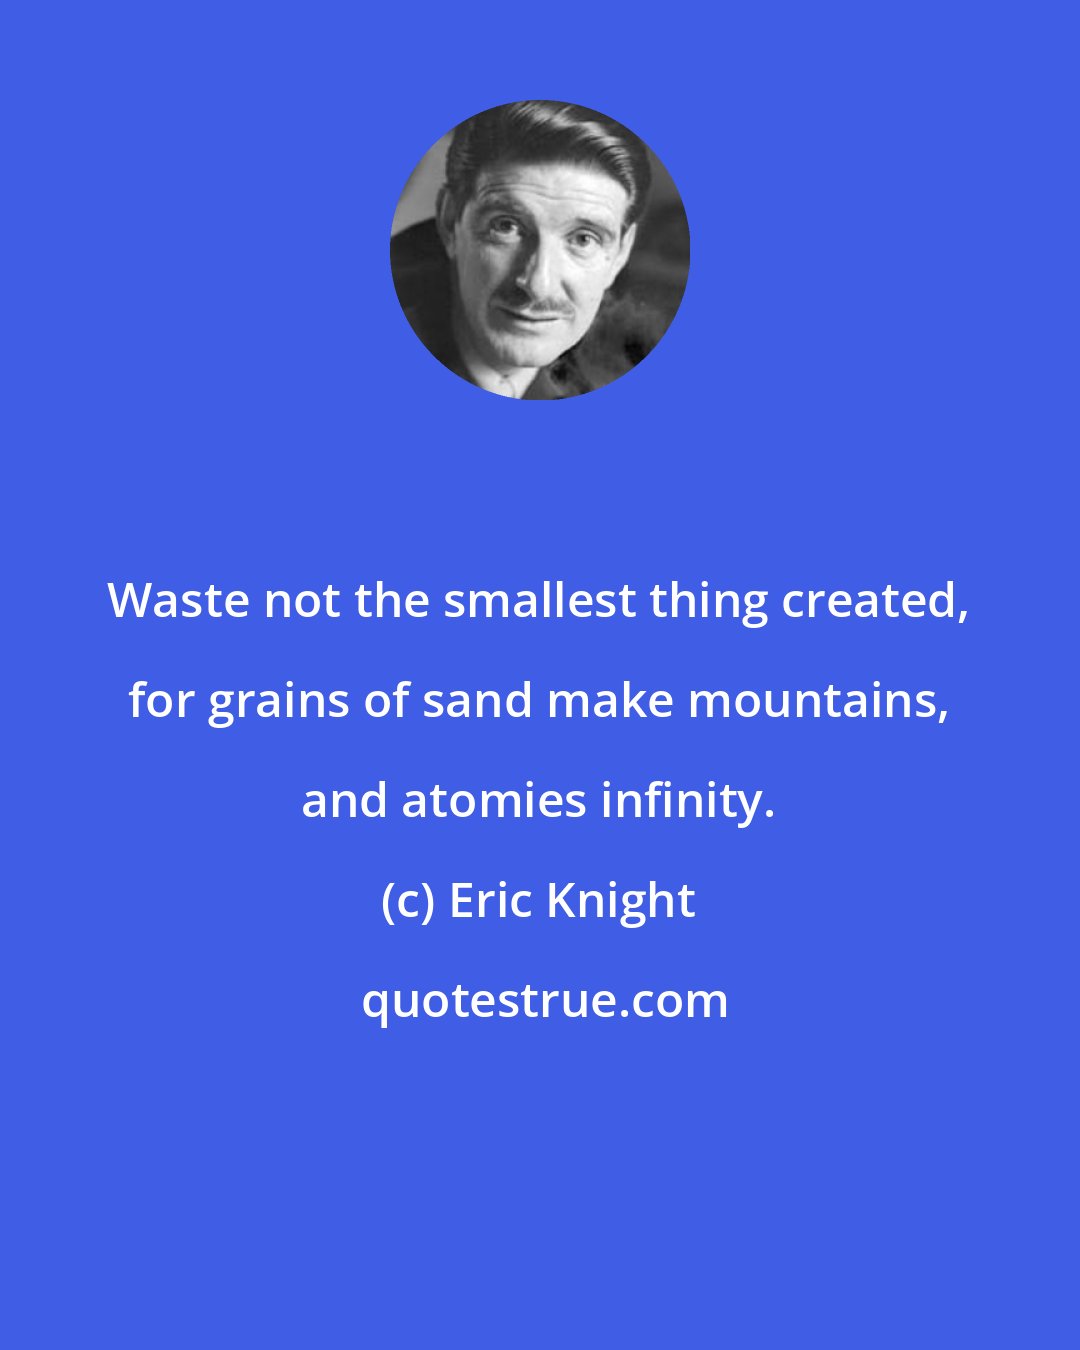 Eric Knight: Waste not the smallest thing created, for grains of sand make mountains, and atomies infinity.